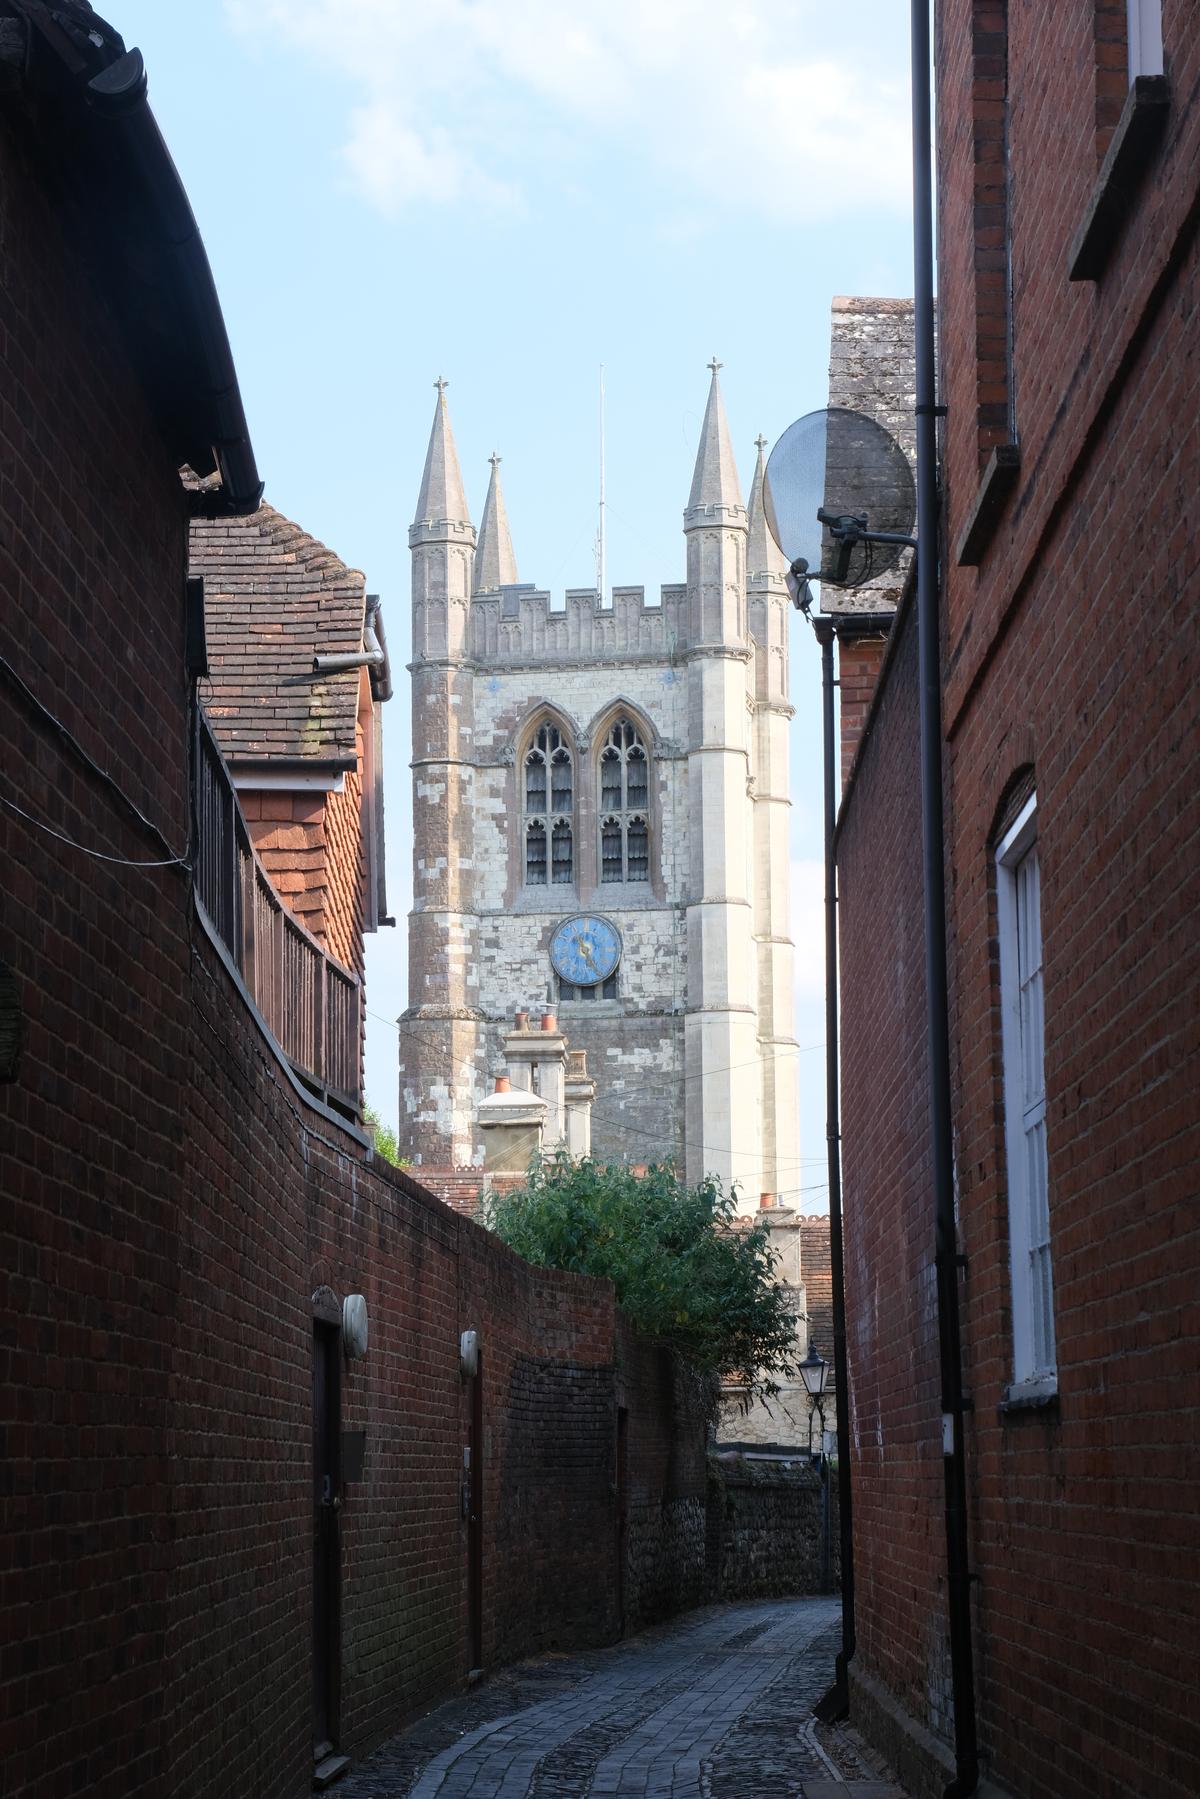 A church peeking out over an brick alleyway